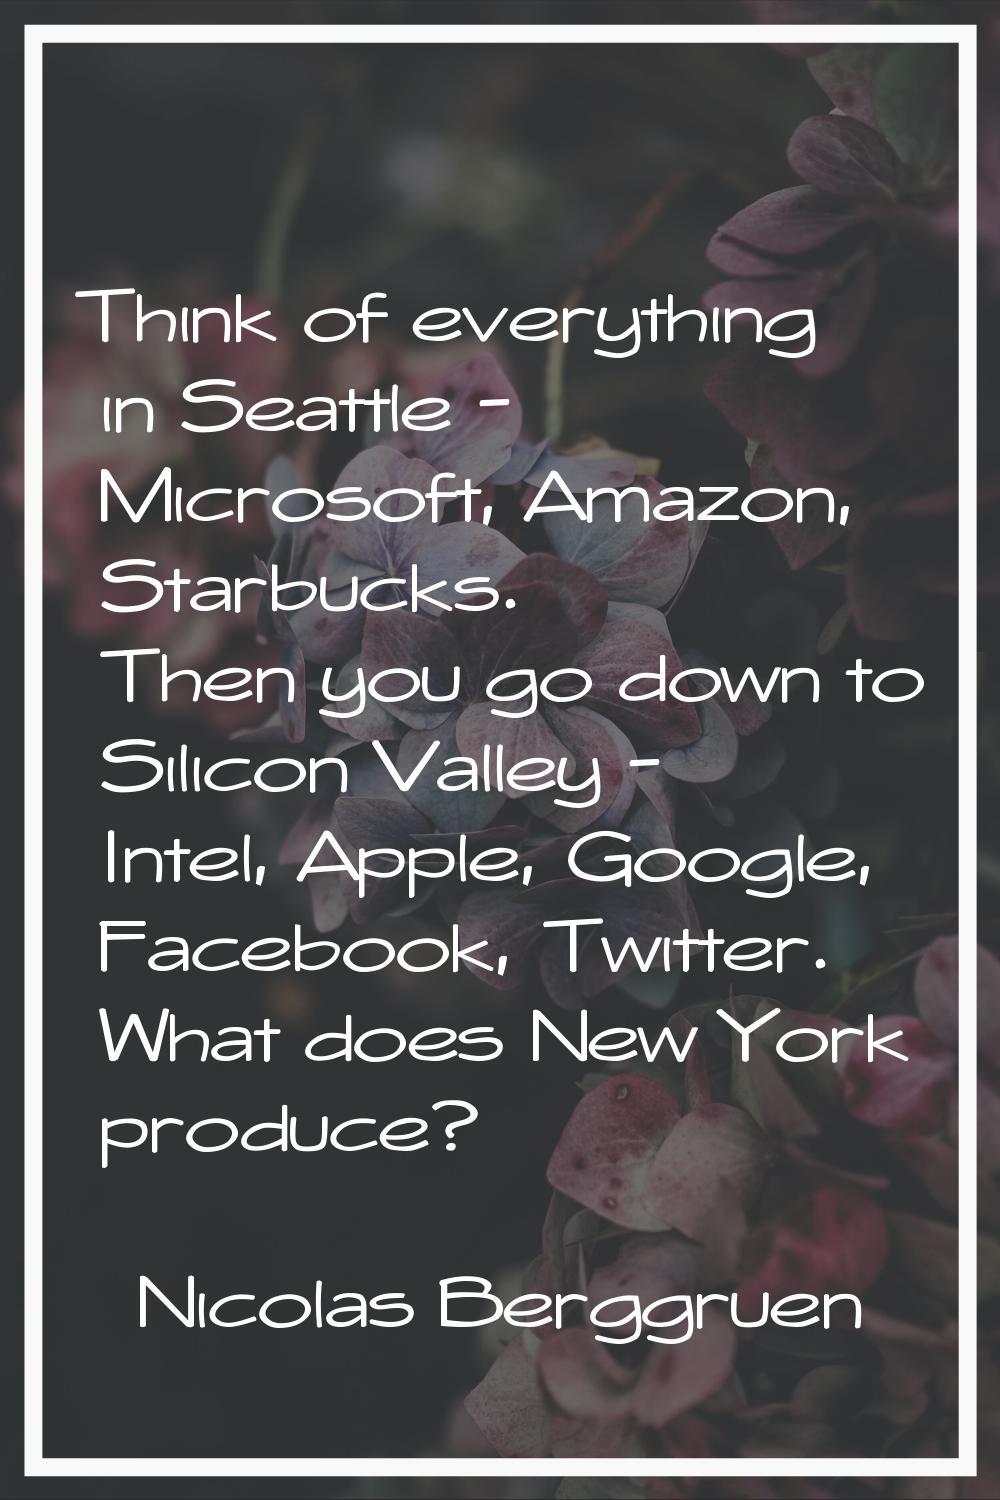 Think of everything in Seattle - Microsoft, Amazon, Starbucks. Then you go down to Silicon Valley -